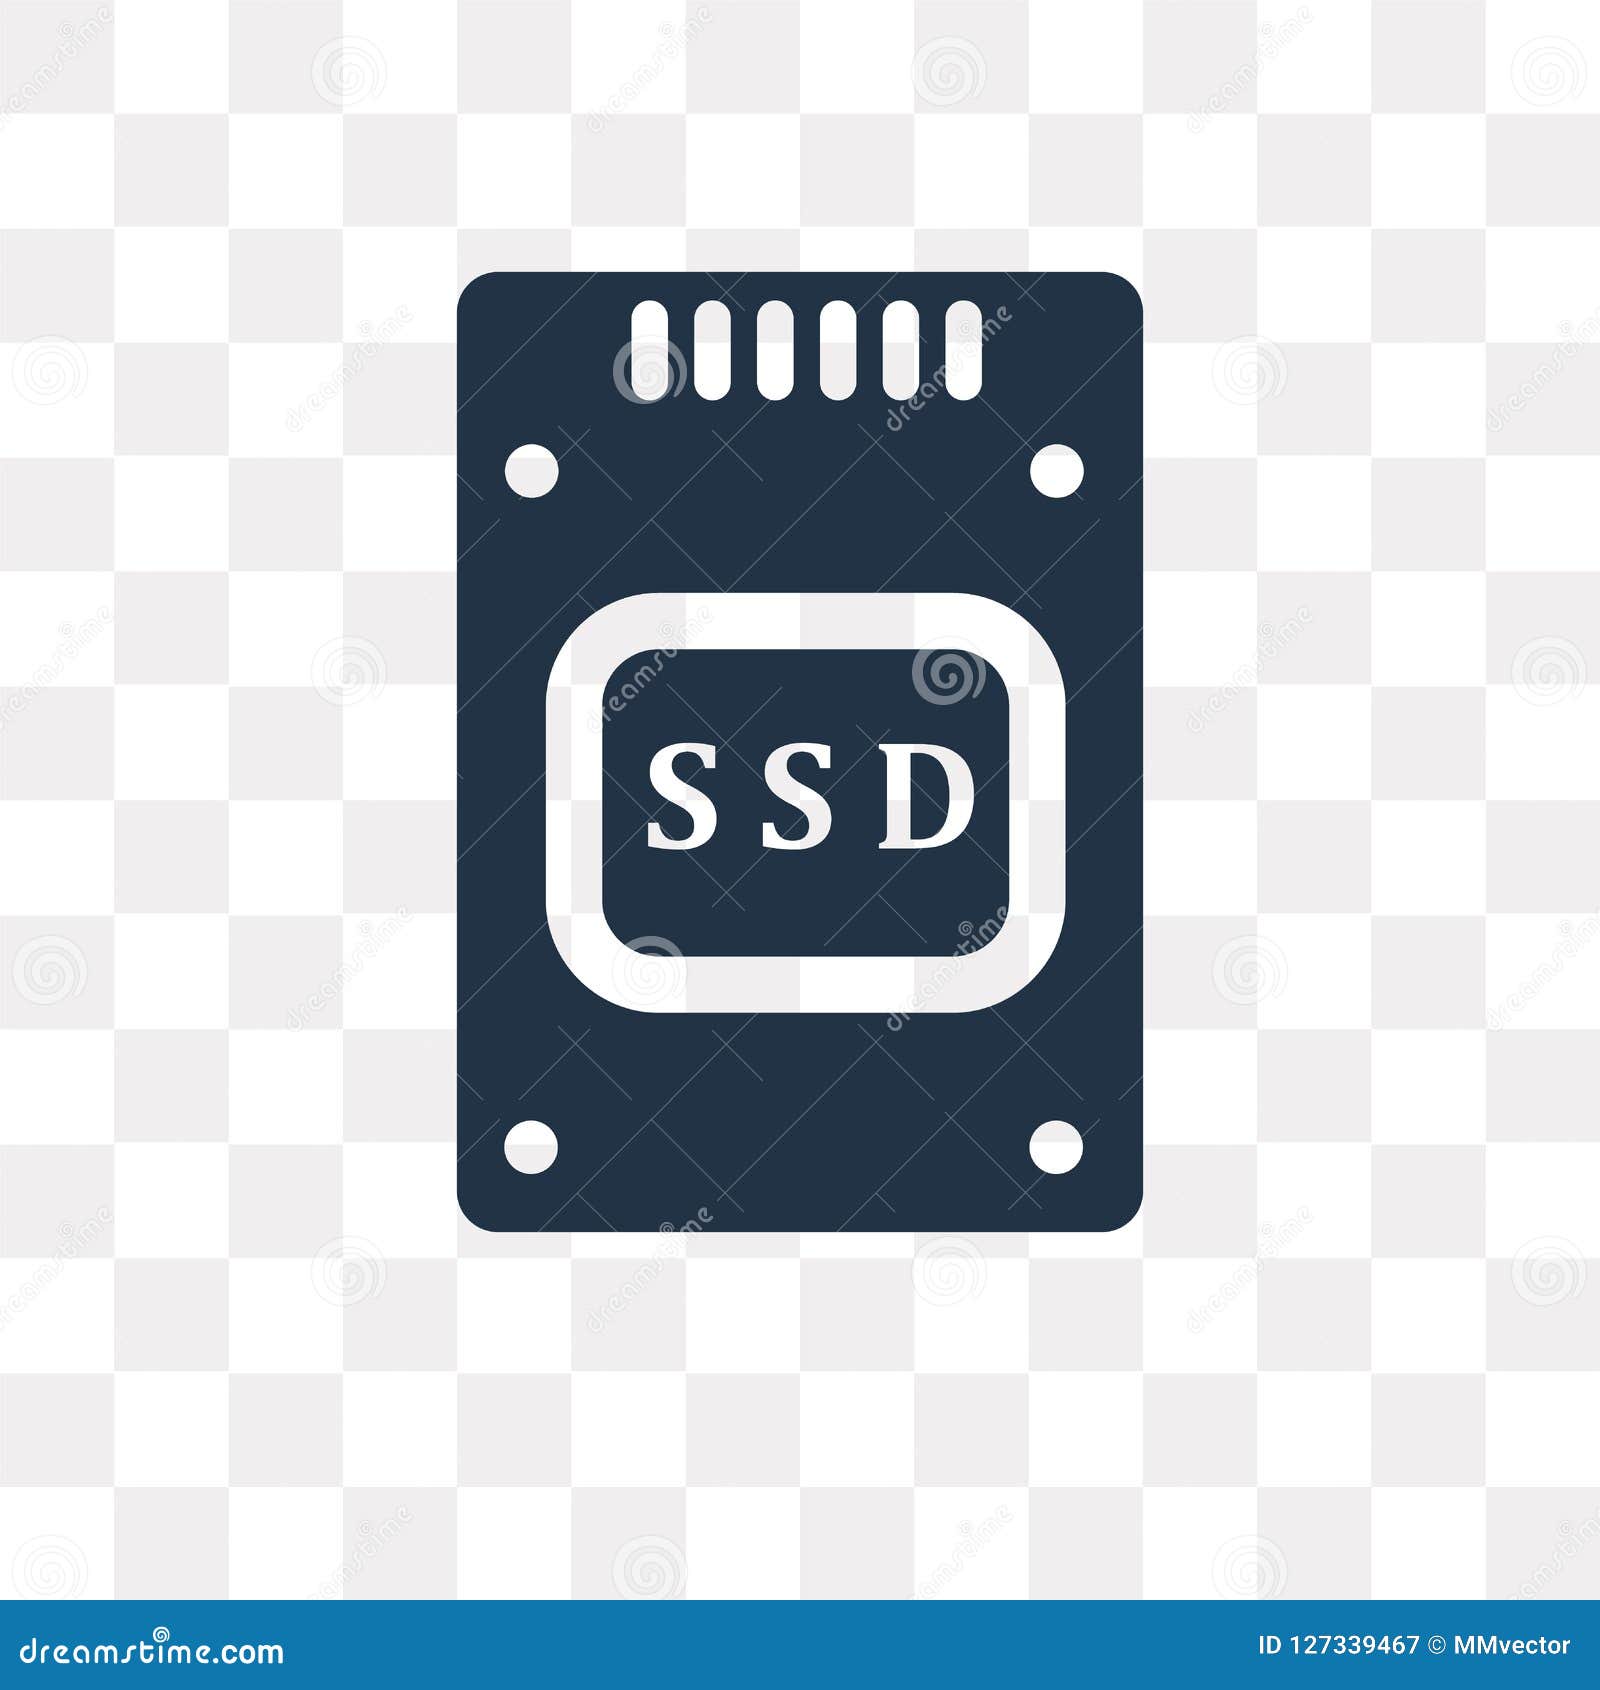 Ssd Vector Icon Isolated On Transparent Background Ssd Transpa Stock Vector Illustration Of Security Data